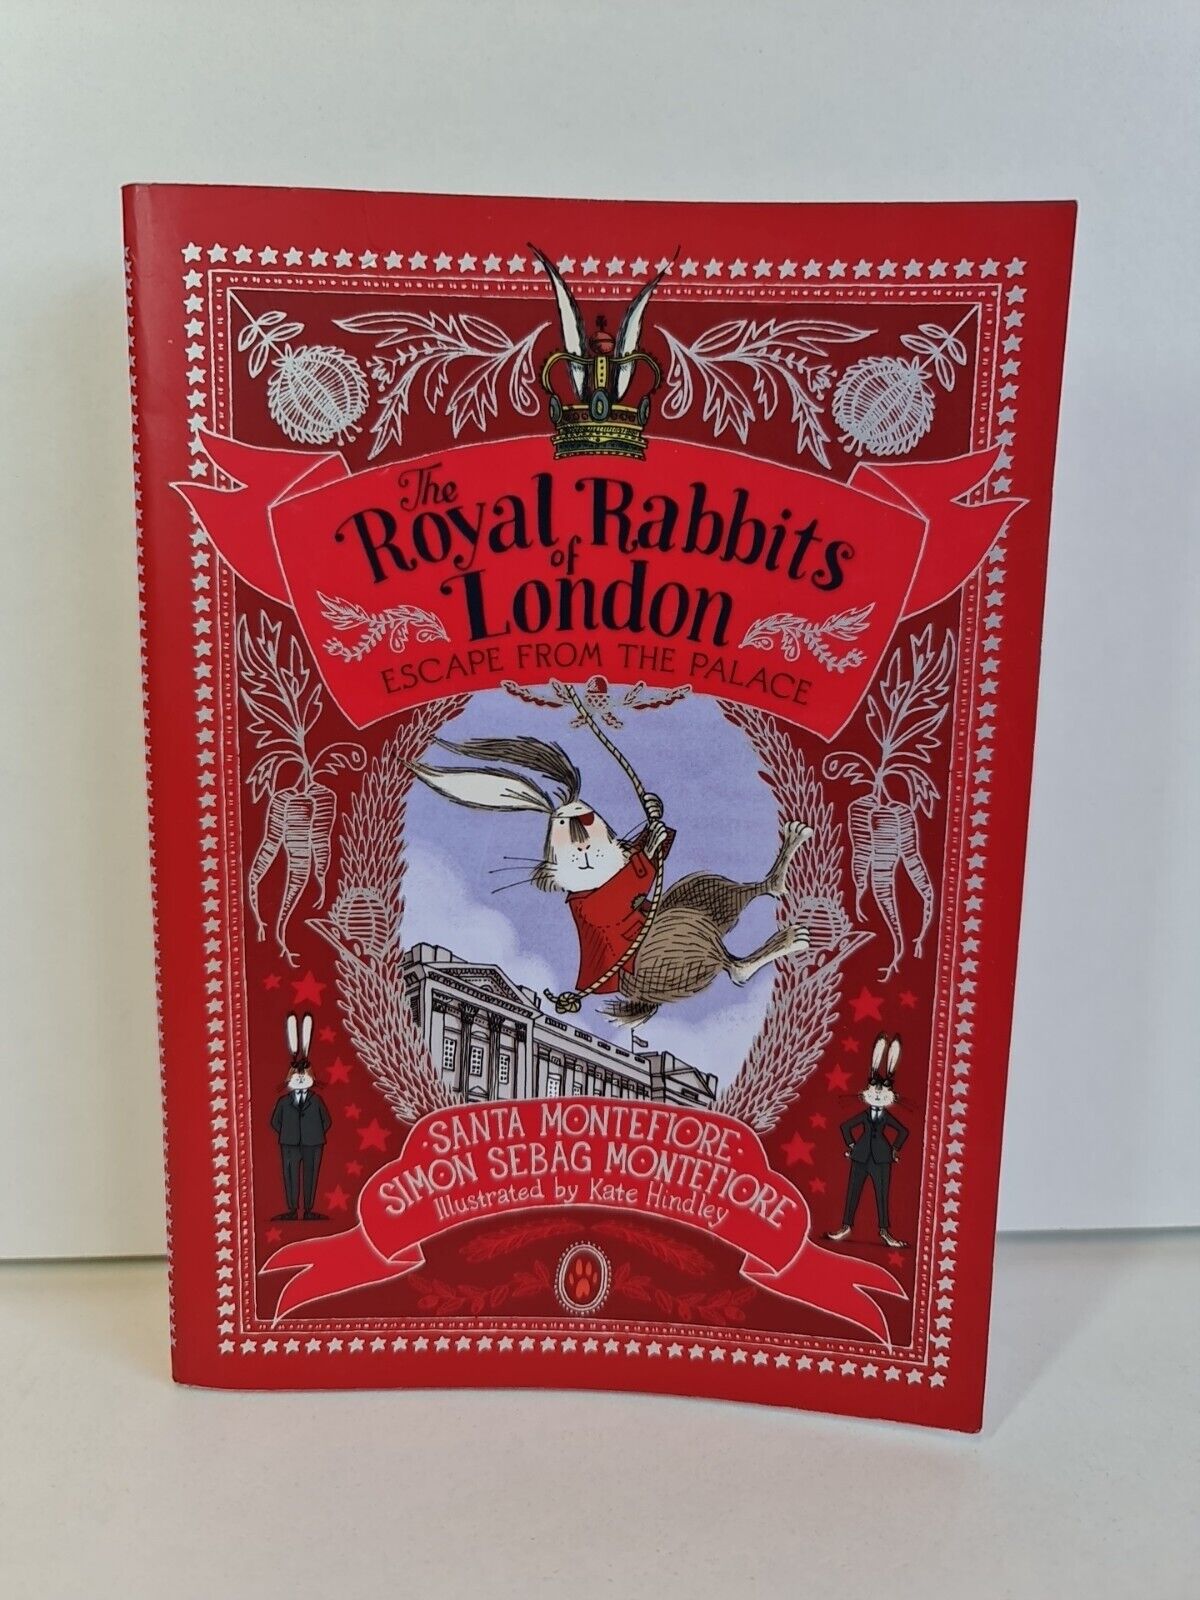 The Royal Rabbits of London; Escape from the Palace by Montefiore (2017)